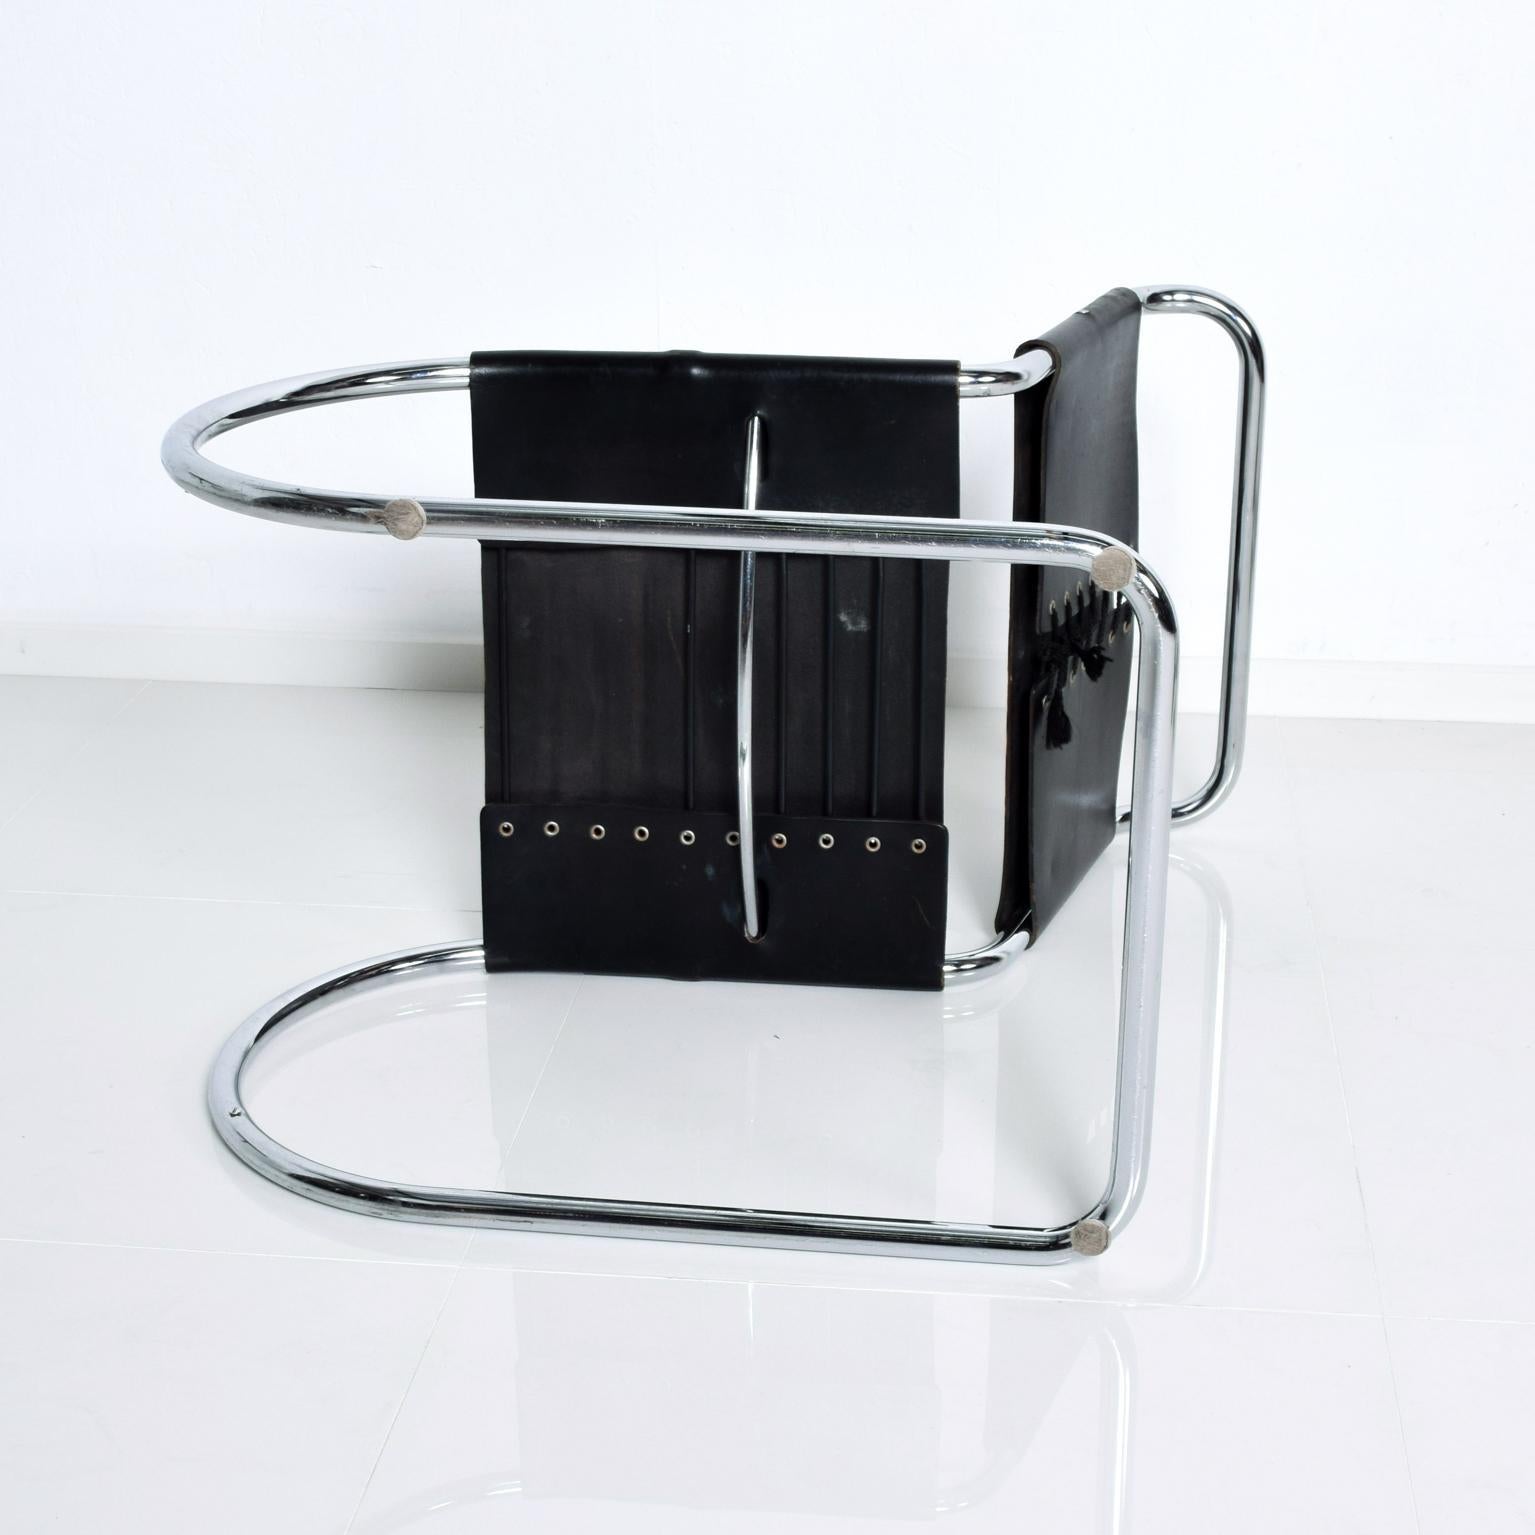 For your consideration, an iconic MR chair designed by Ludwig Mies van der Rohe. Tubular chrome-plated steel with black leather. No Label present. Dimensions: 33